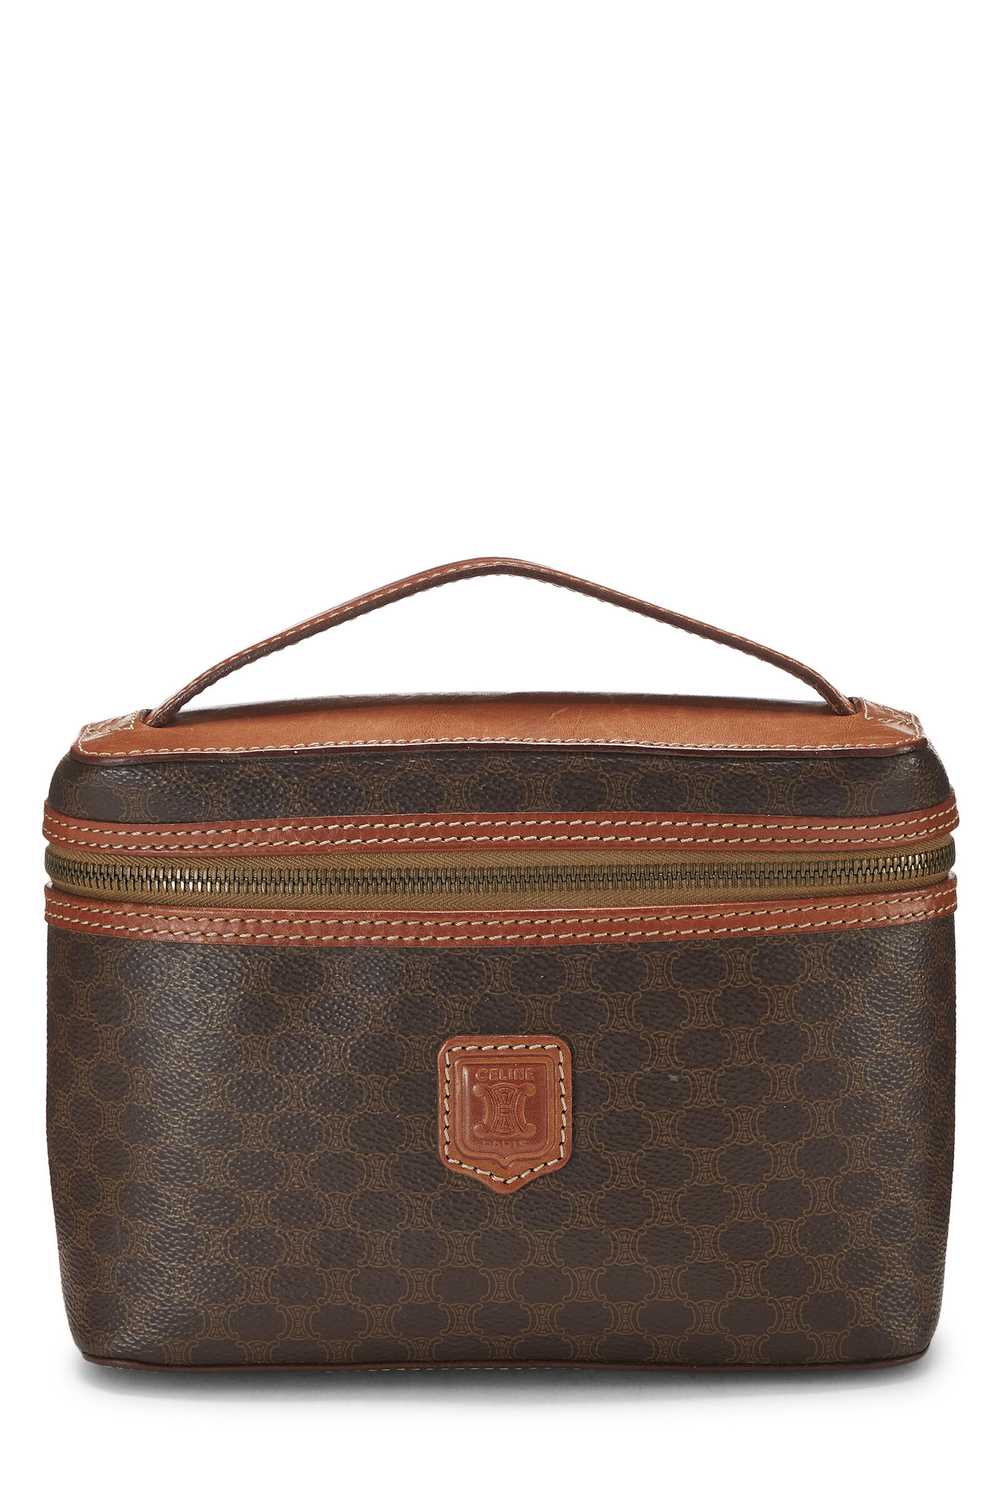 Brown Coated Canvas Macadam Toiletry Bag - image 1